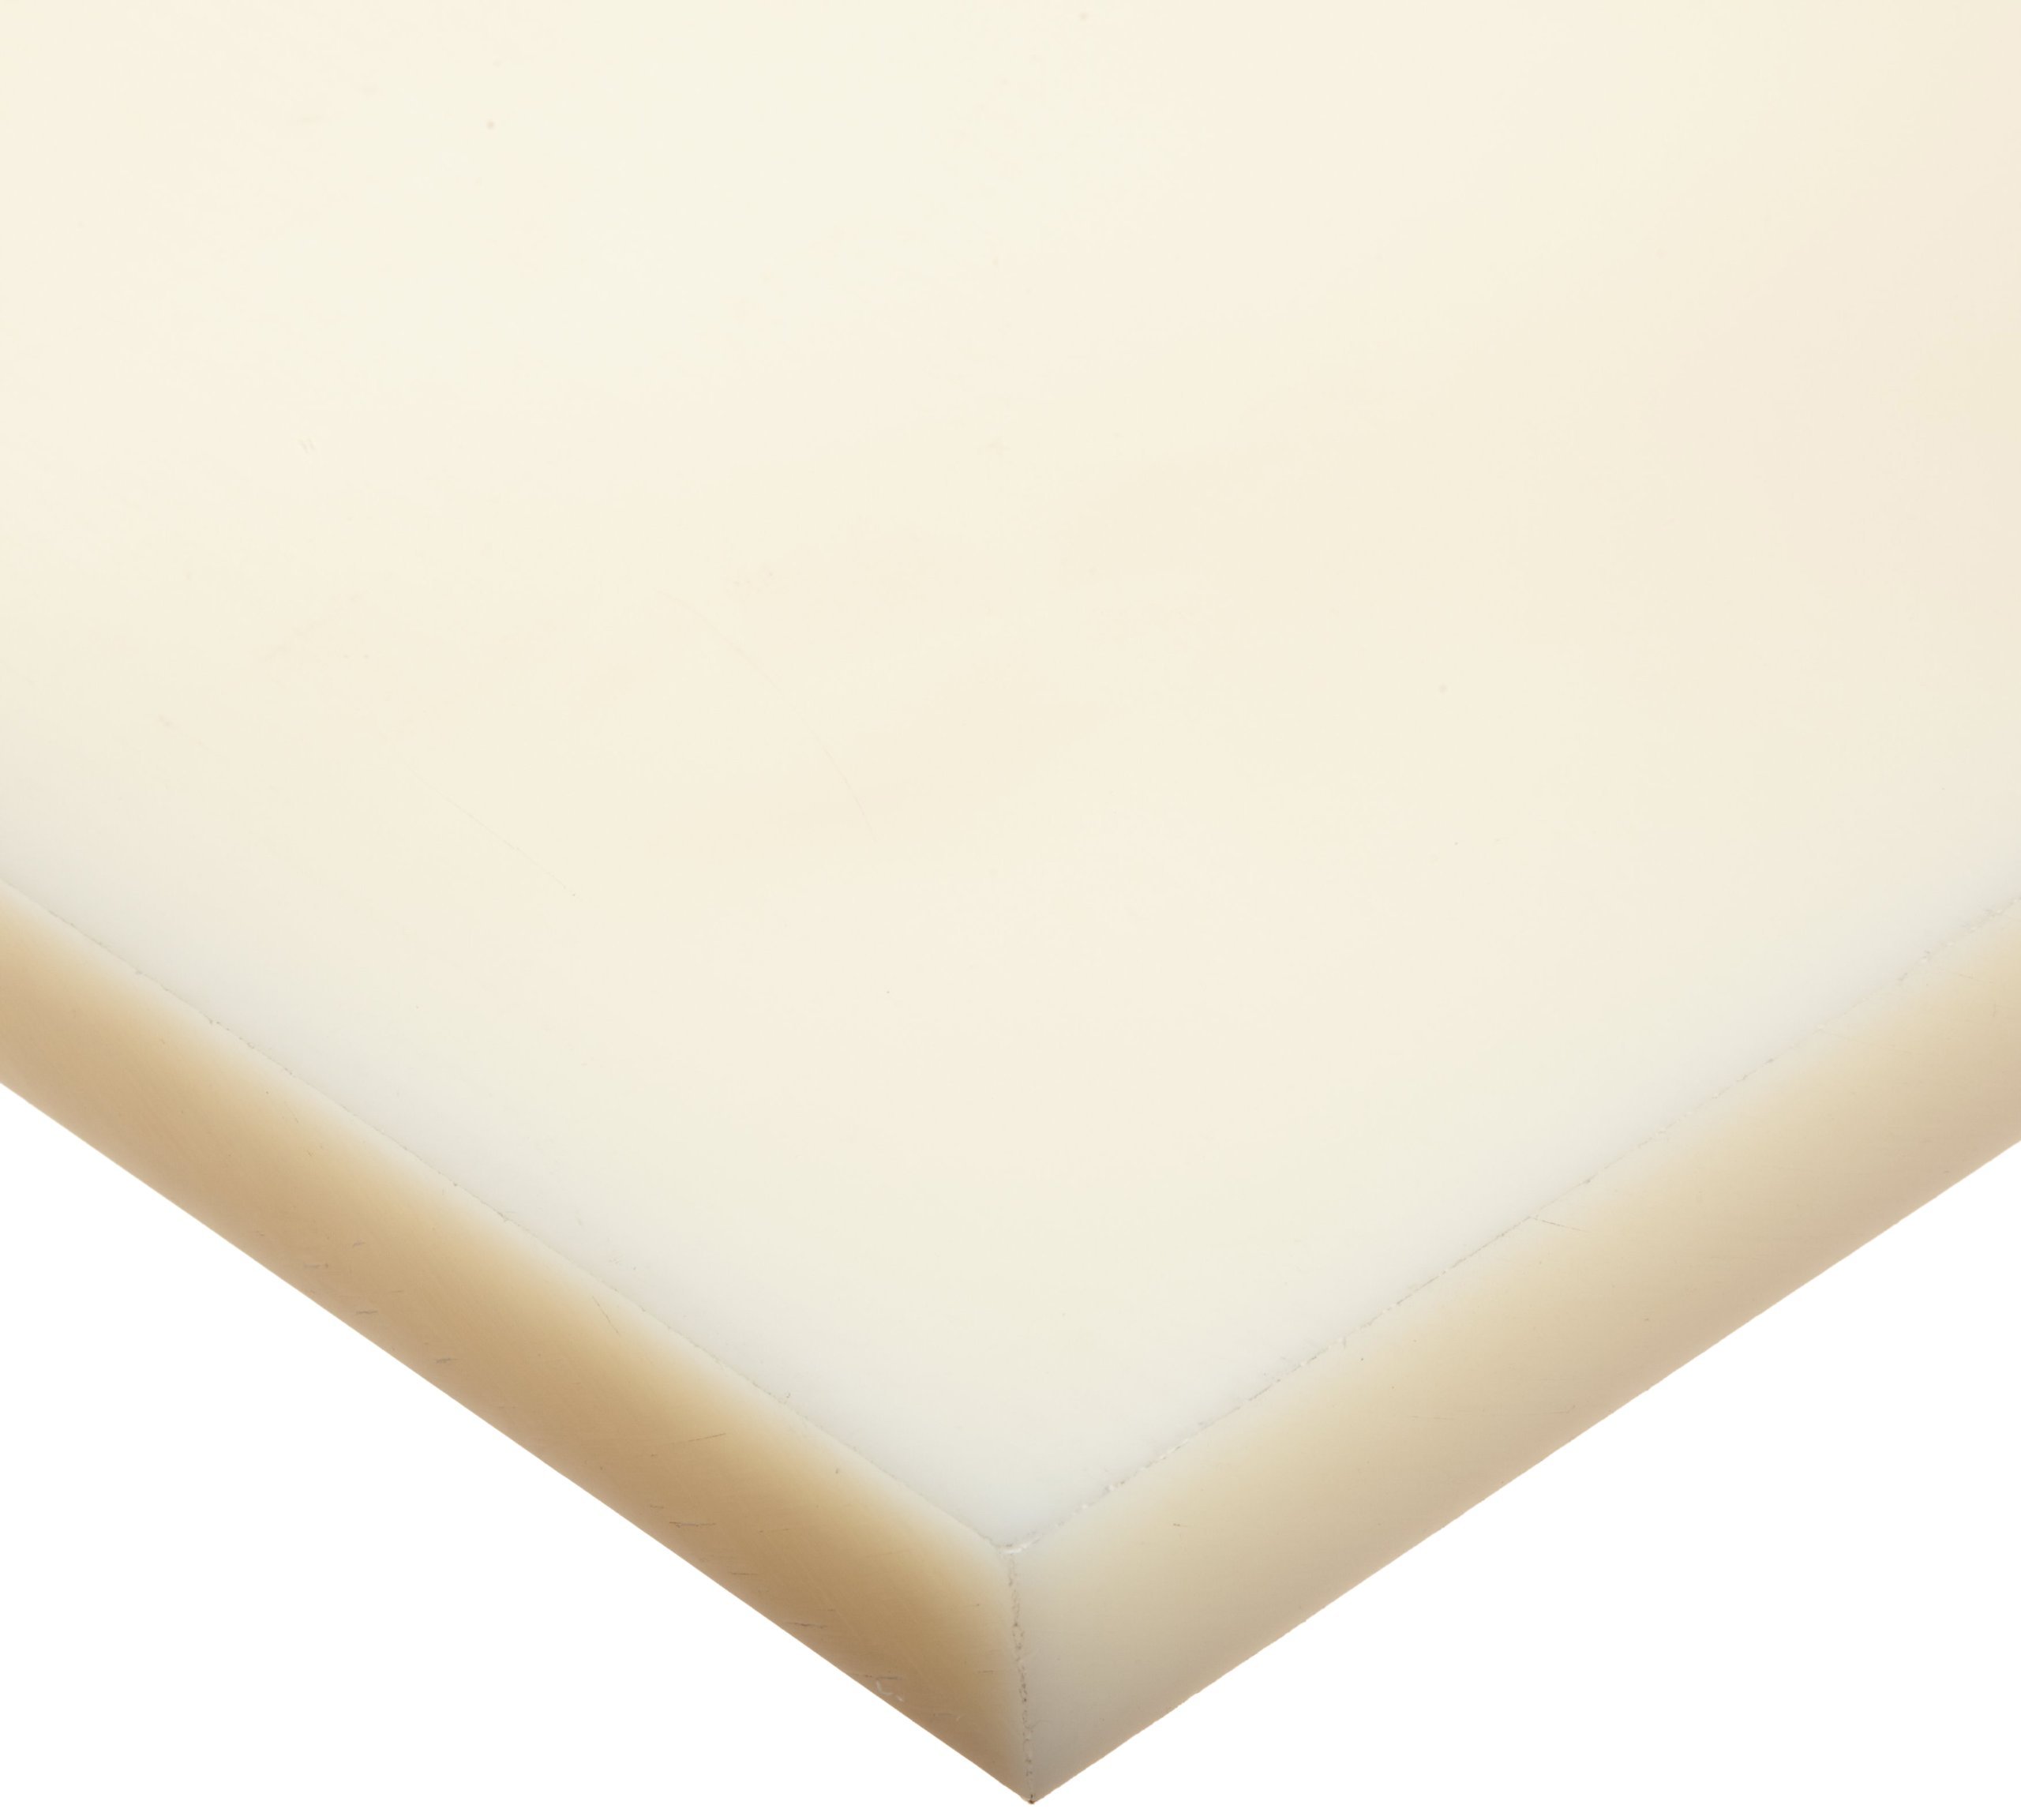 1/8 .125" Thick x 12" x 48" Nylon 6/6 Extruded Sheet Natural Tint 